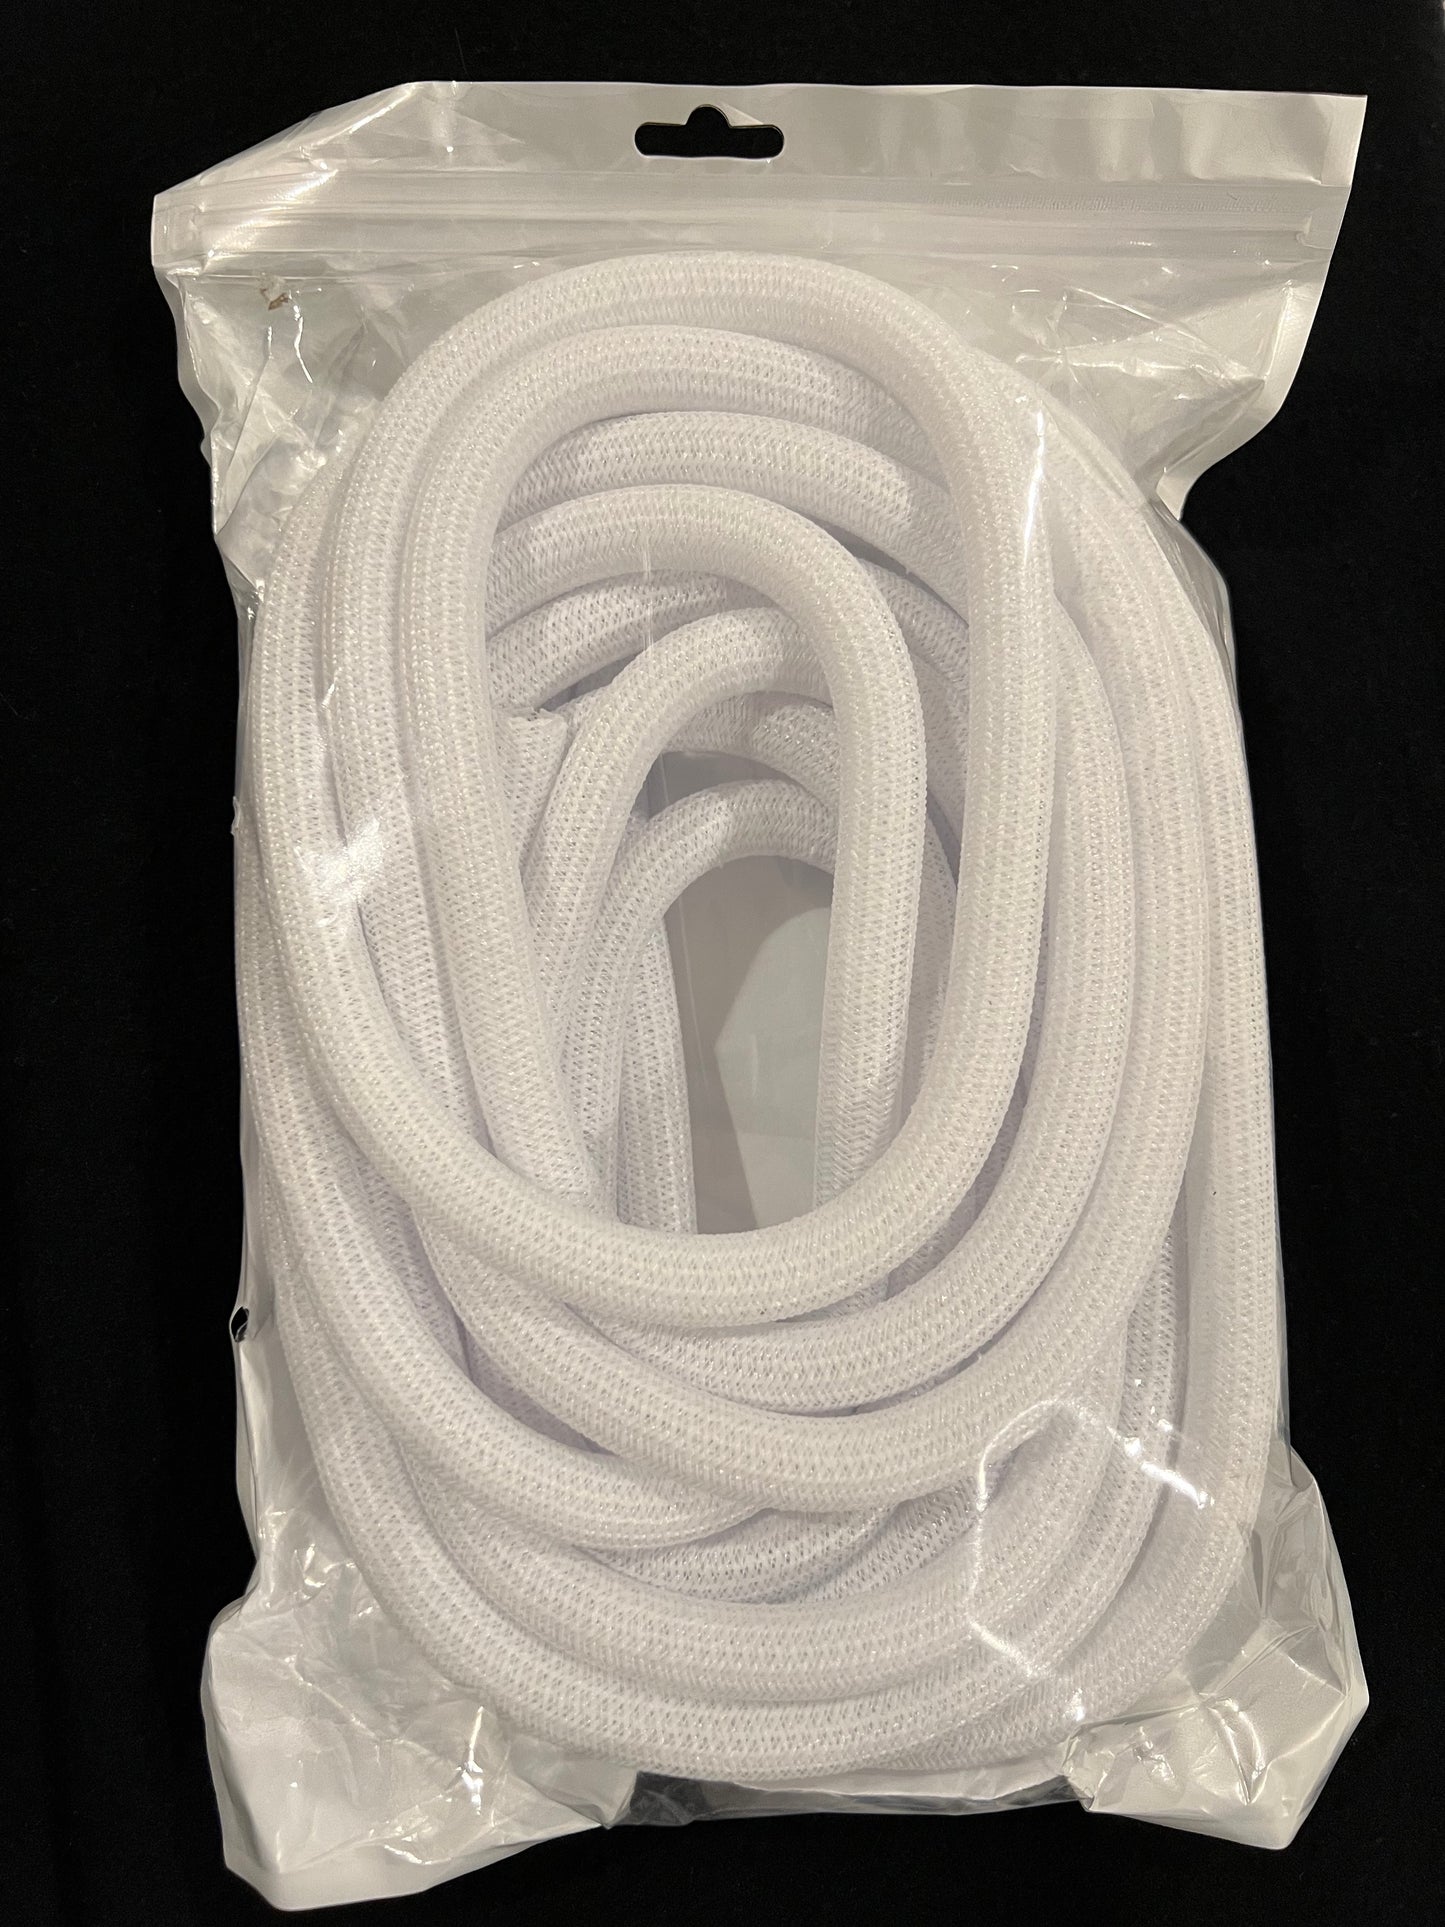 White Braided Cable Wrap Sleeve Protector - Self-Wrapping, Split Wire Loom for EV Charging Cables - 236 inches